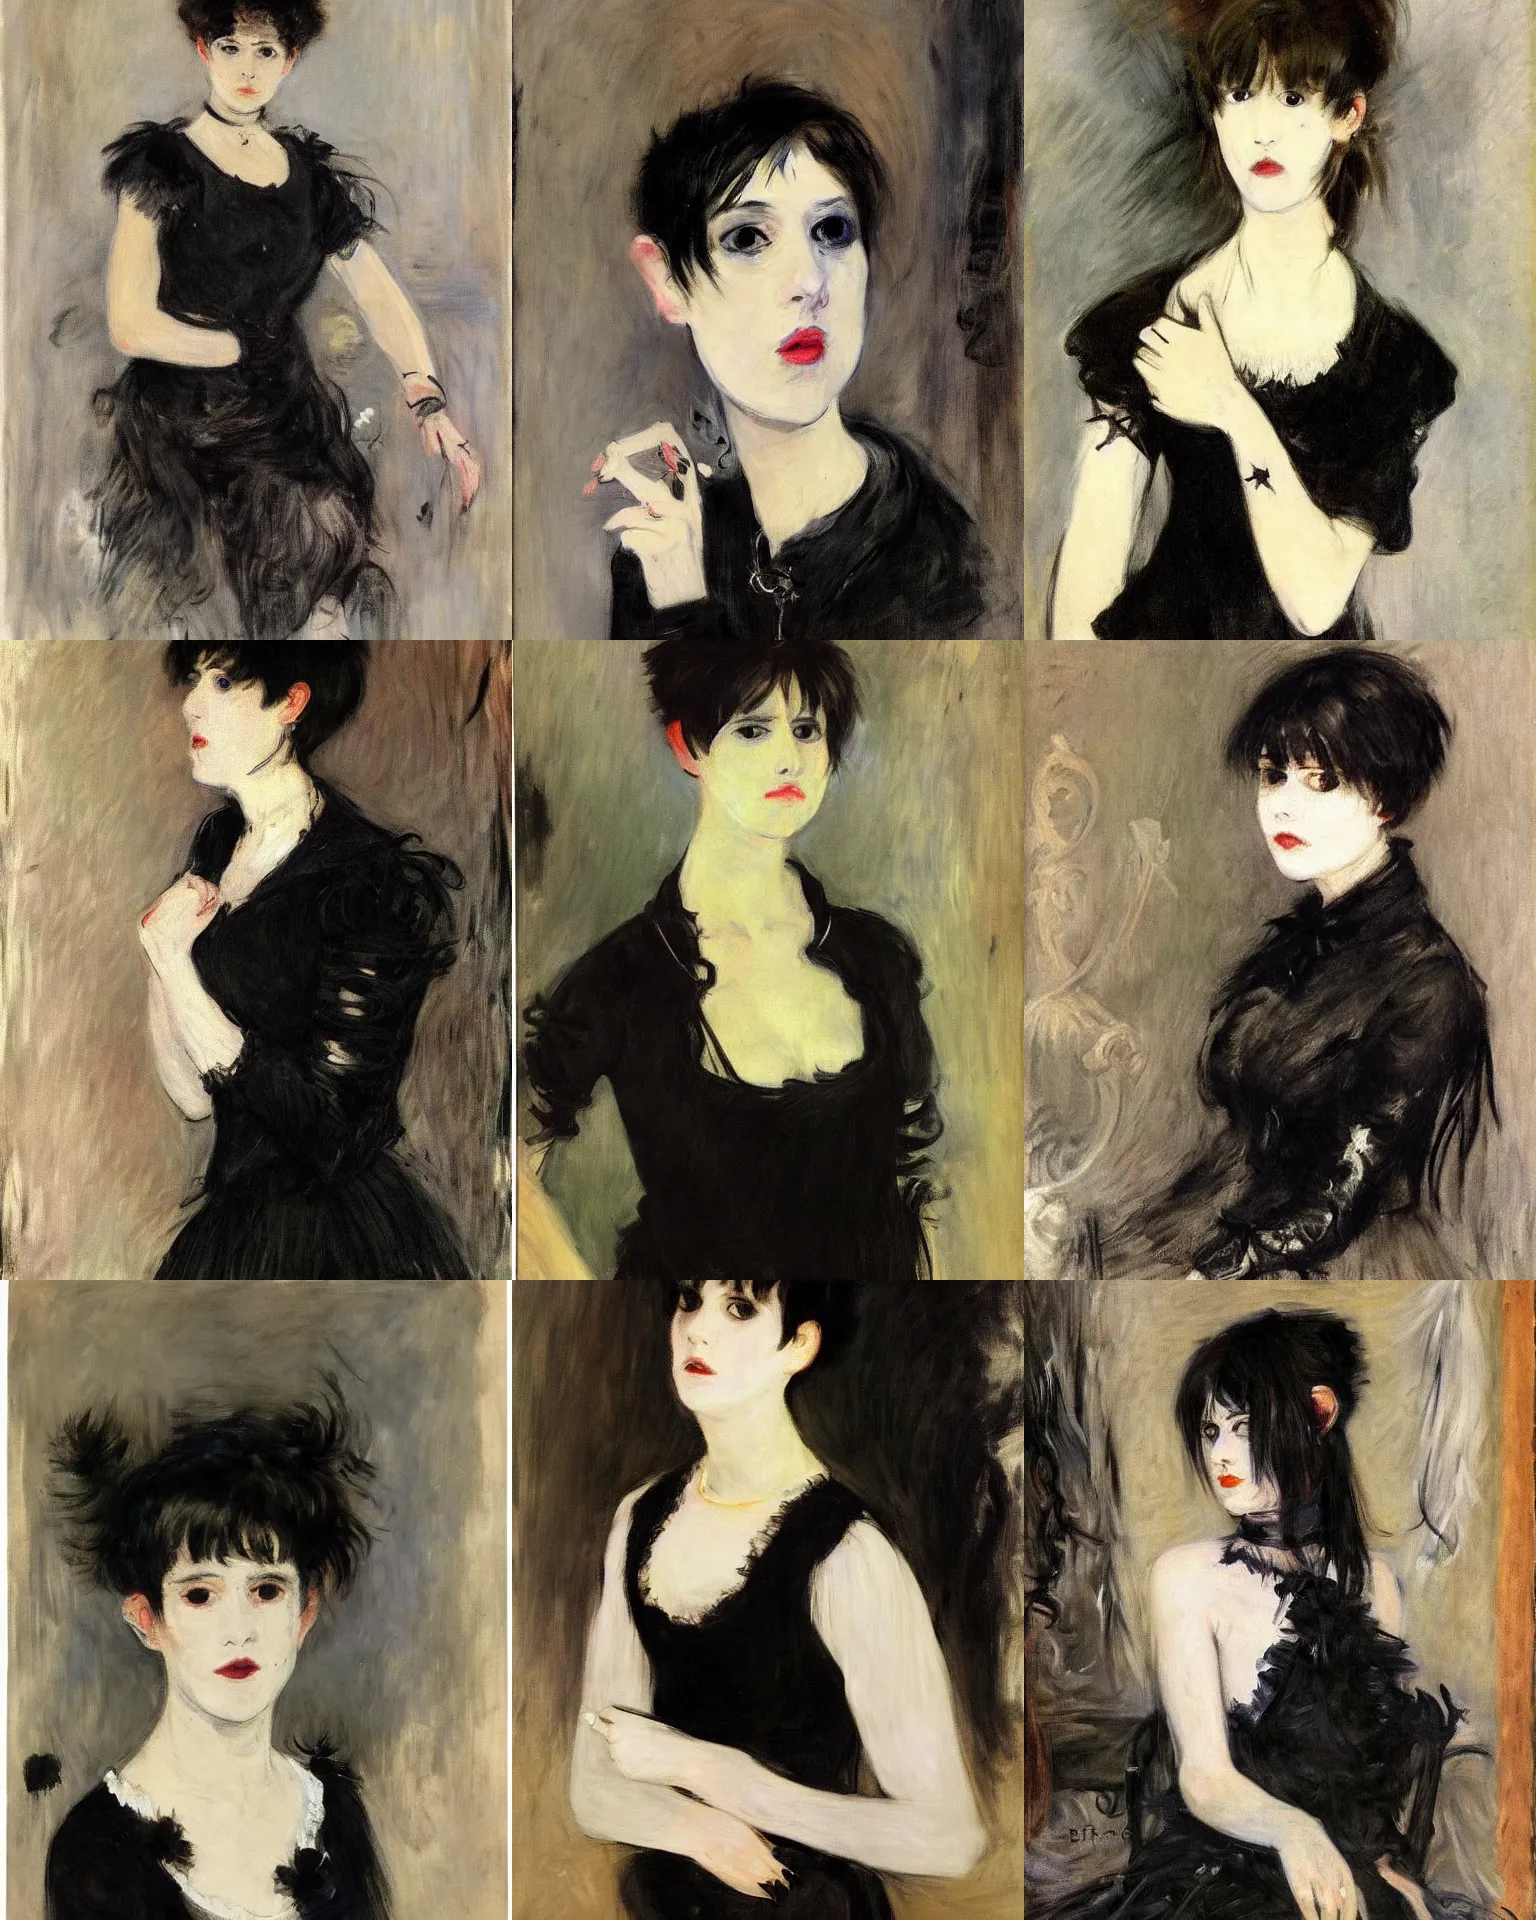 Prompt: A goth portrait by Berthe Morisot. Her hair is dark brown and cut into a short, messy pixie cut. She has a slightly rounded face, with a pointed chin, large entirely-black eyes, and a small nose. She is wearing a black tank top, a black leather jacket, a black knee-length skirt, a black choker, and black leather boots.